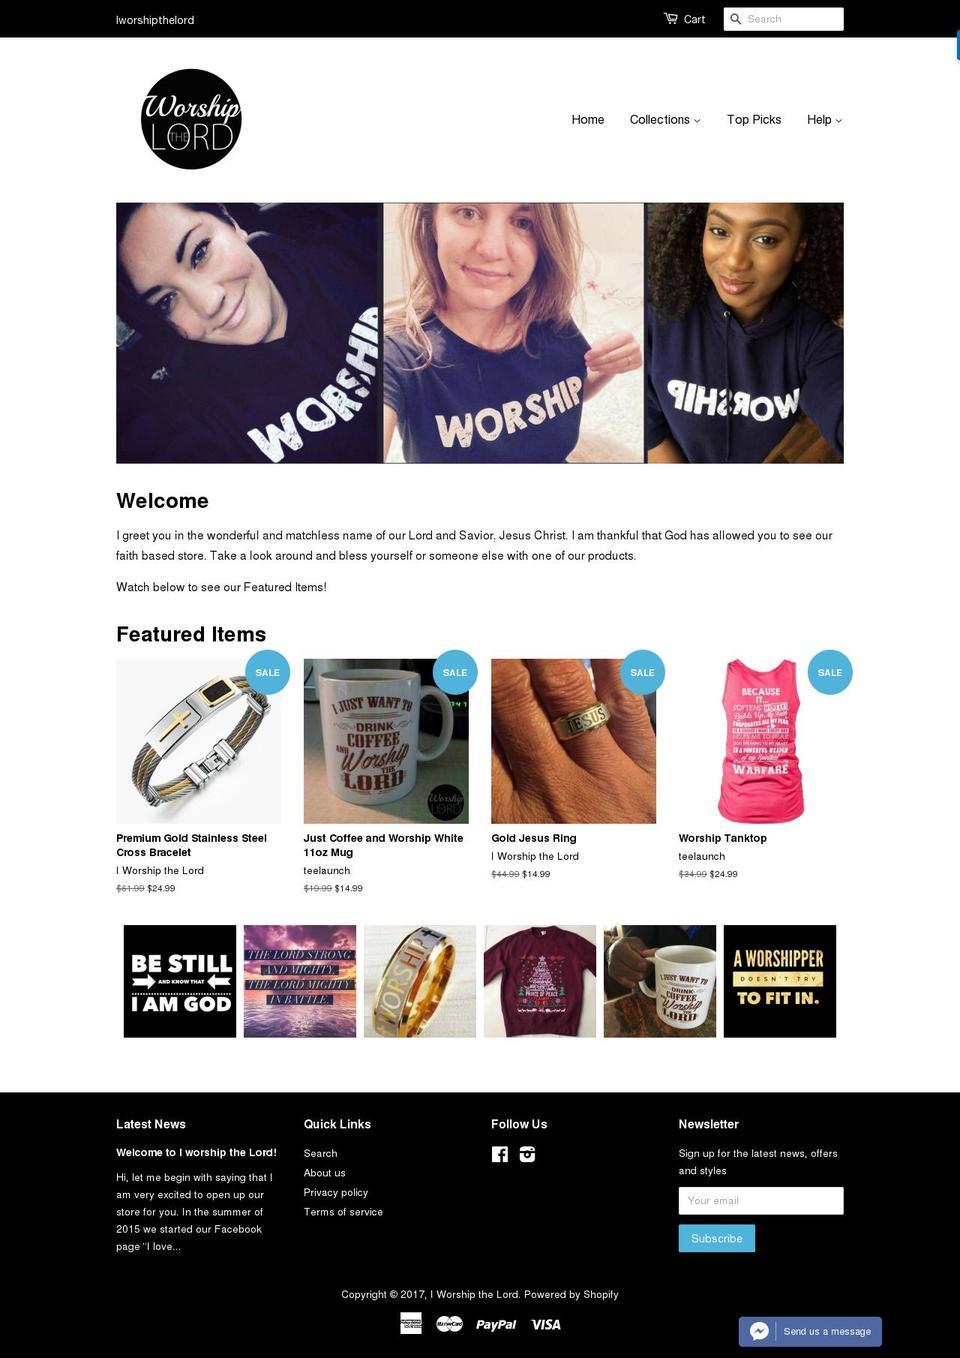 Refresh Shopify theme site example iworshipthelord.com